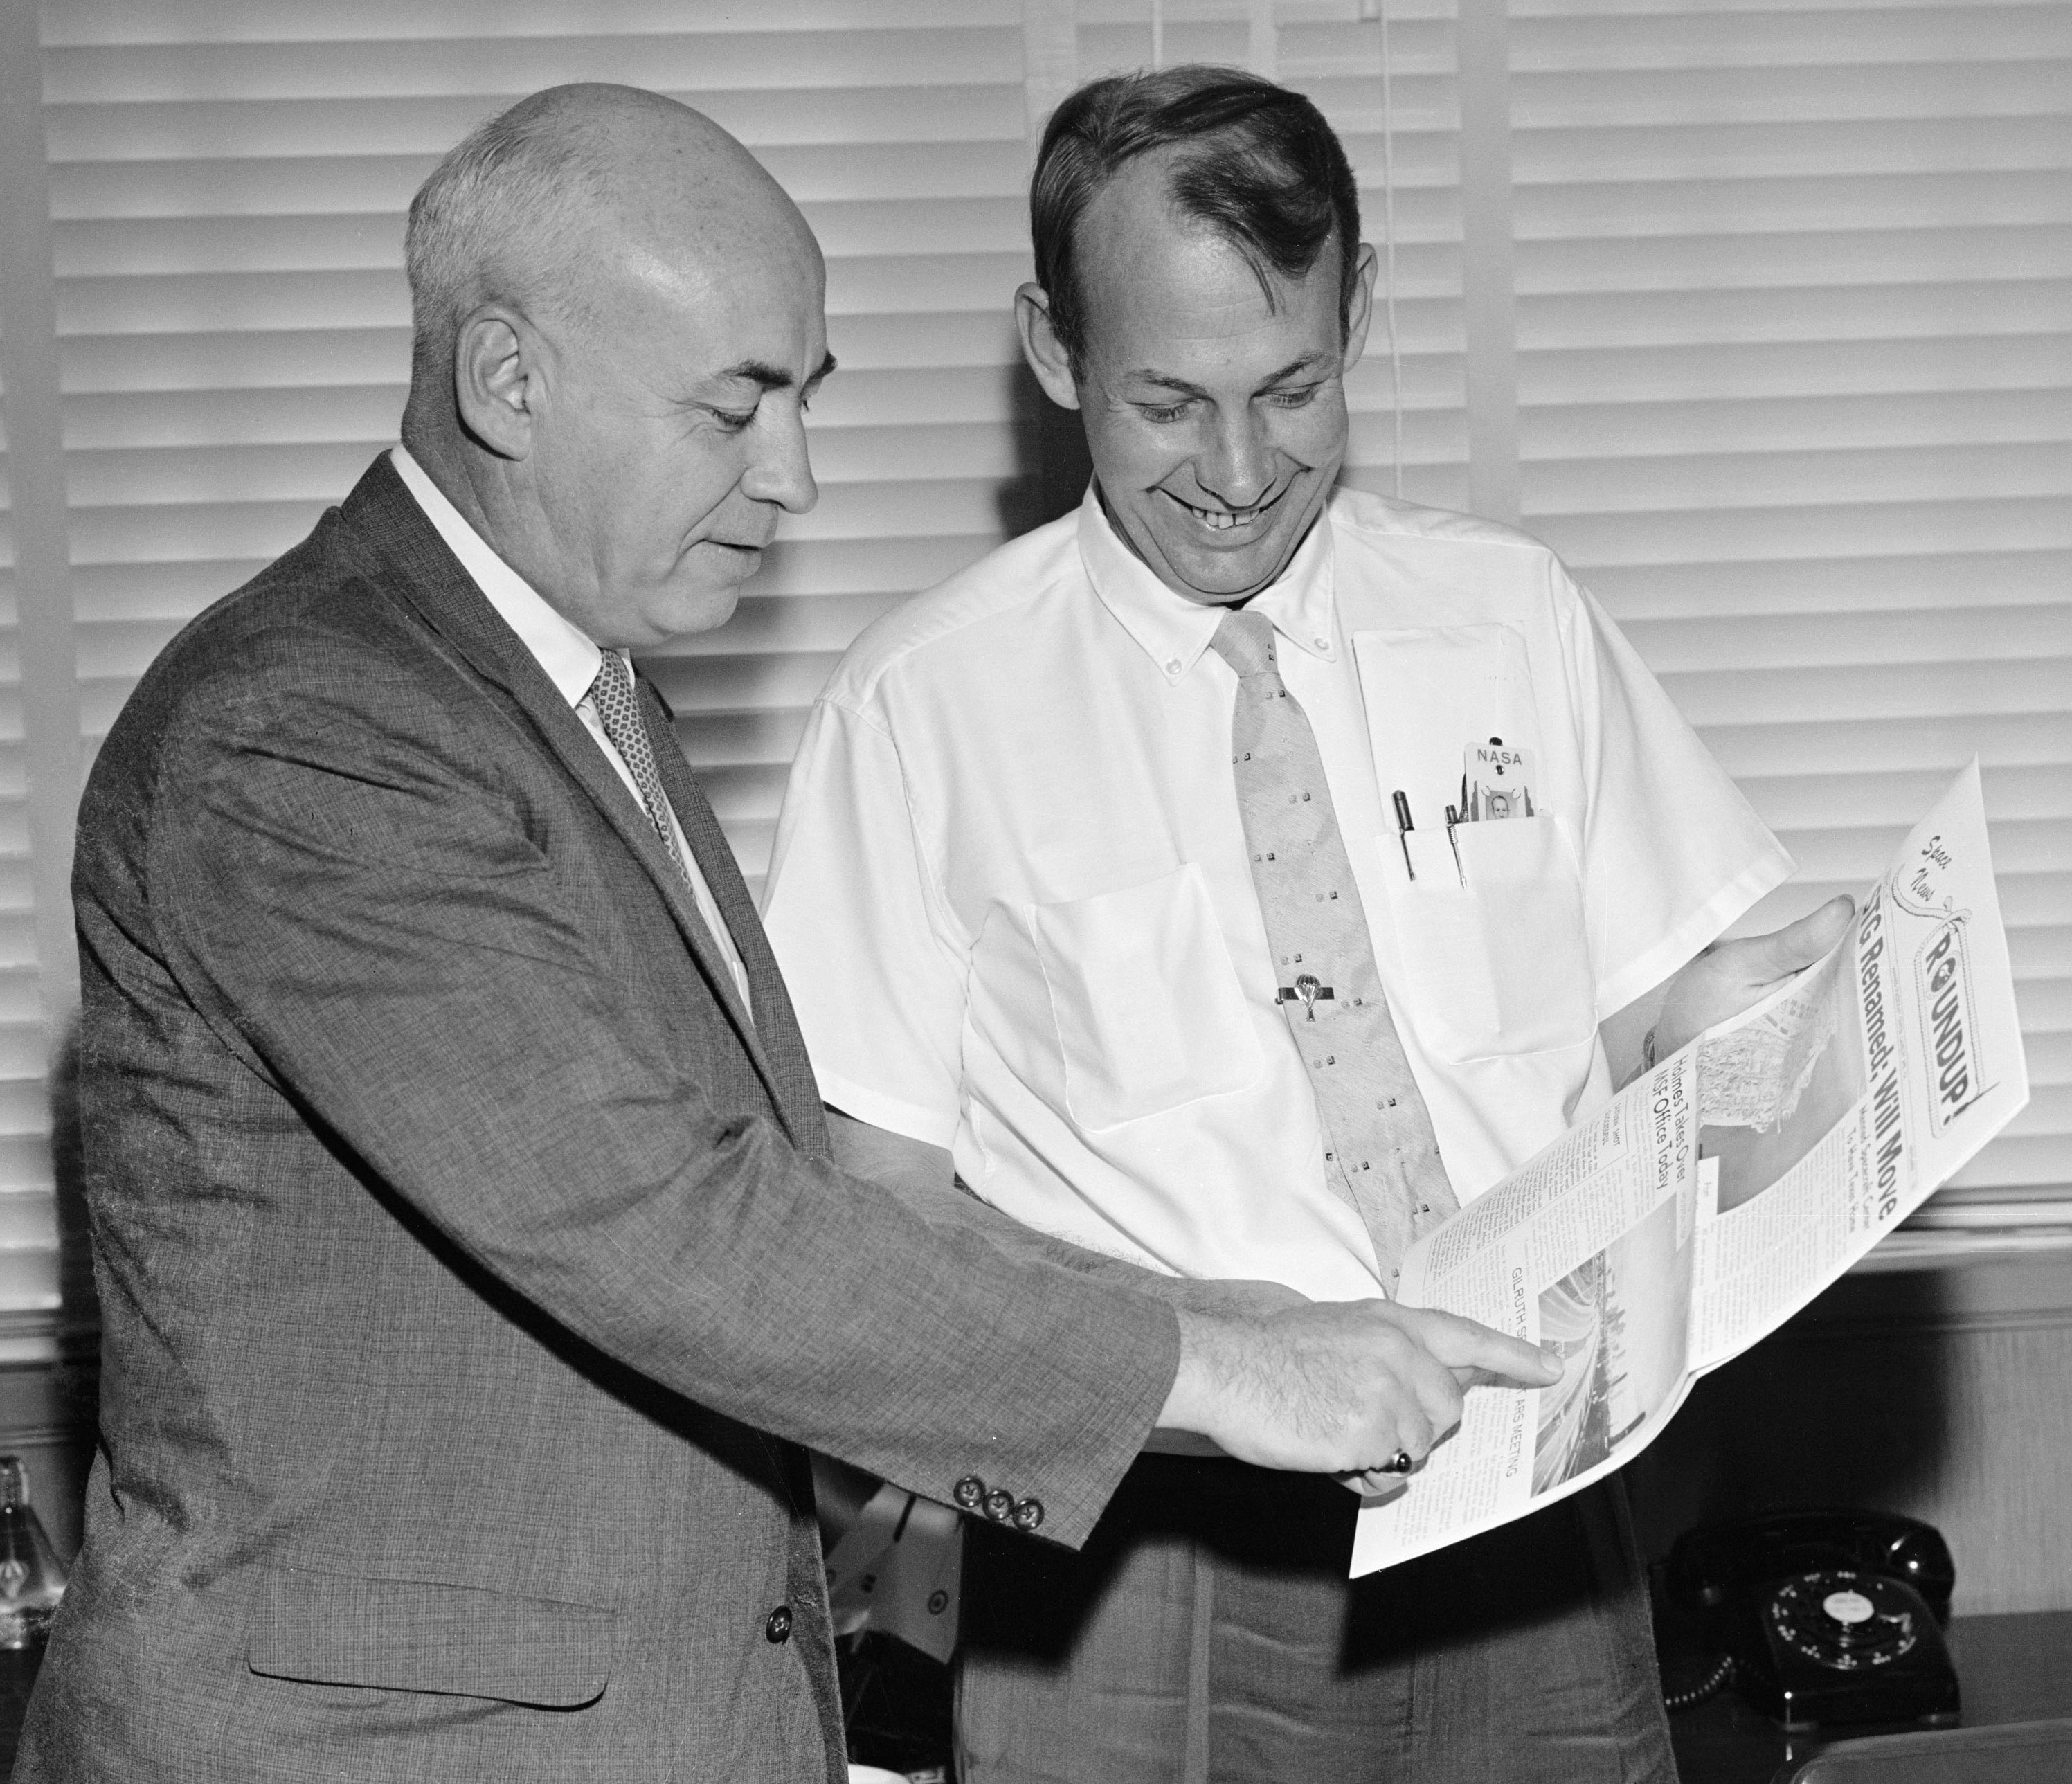 Space Task Group (STG) Director Robert R. Gilruth, left, and his special assistant Paul E. Purser hold the Nov. 1, 1961, edition of the Space News Roundup employee newsletter announcing the move of the STG to Houston and its renaming as the Manned Spacecraft Center (MSC), now NASA’s Johnson Space Center